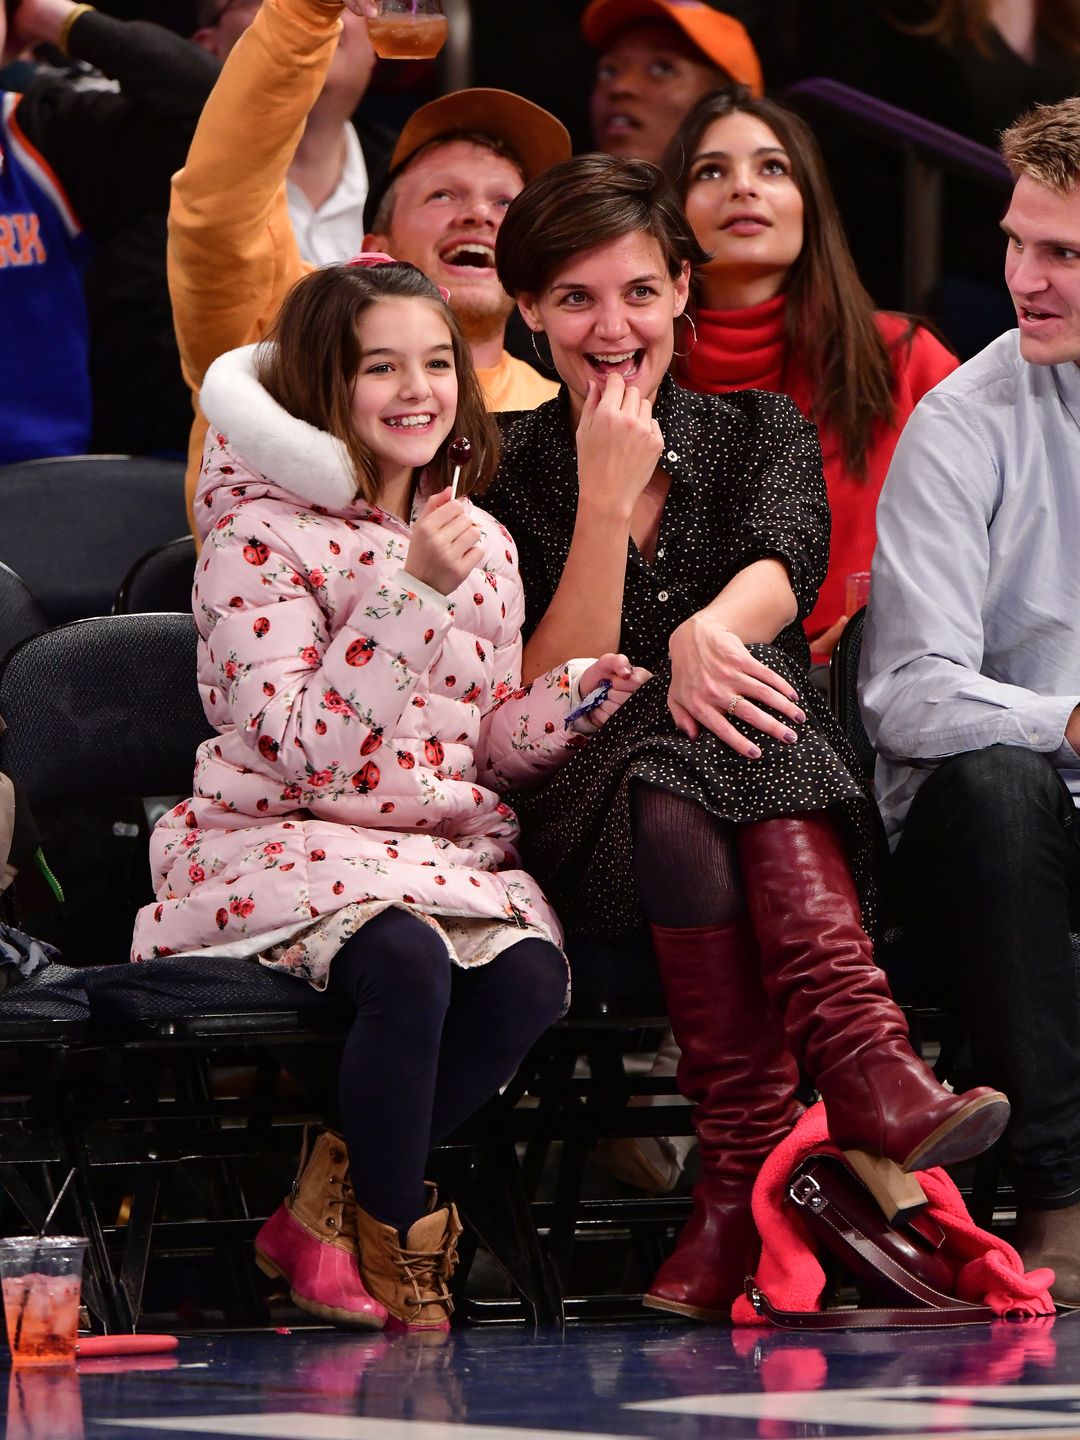 Suri Cruise and Katie Holmes attend the Oklahoma City Thunder vs. New York Knicks game at Madison Square Garden on December 16, 2017 in New York City.